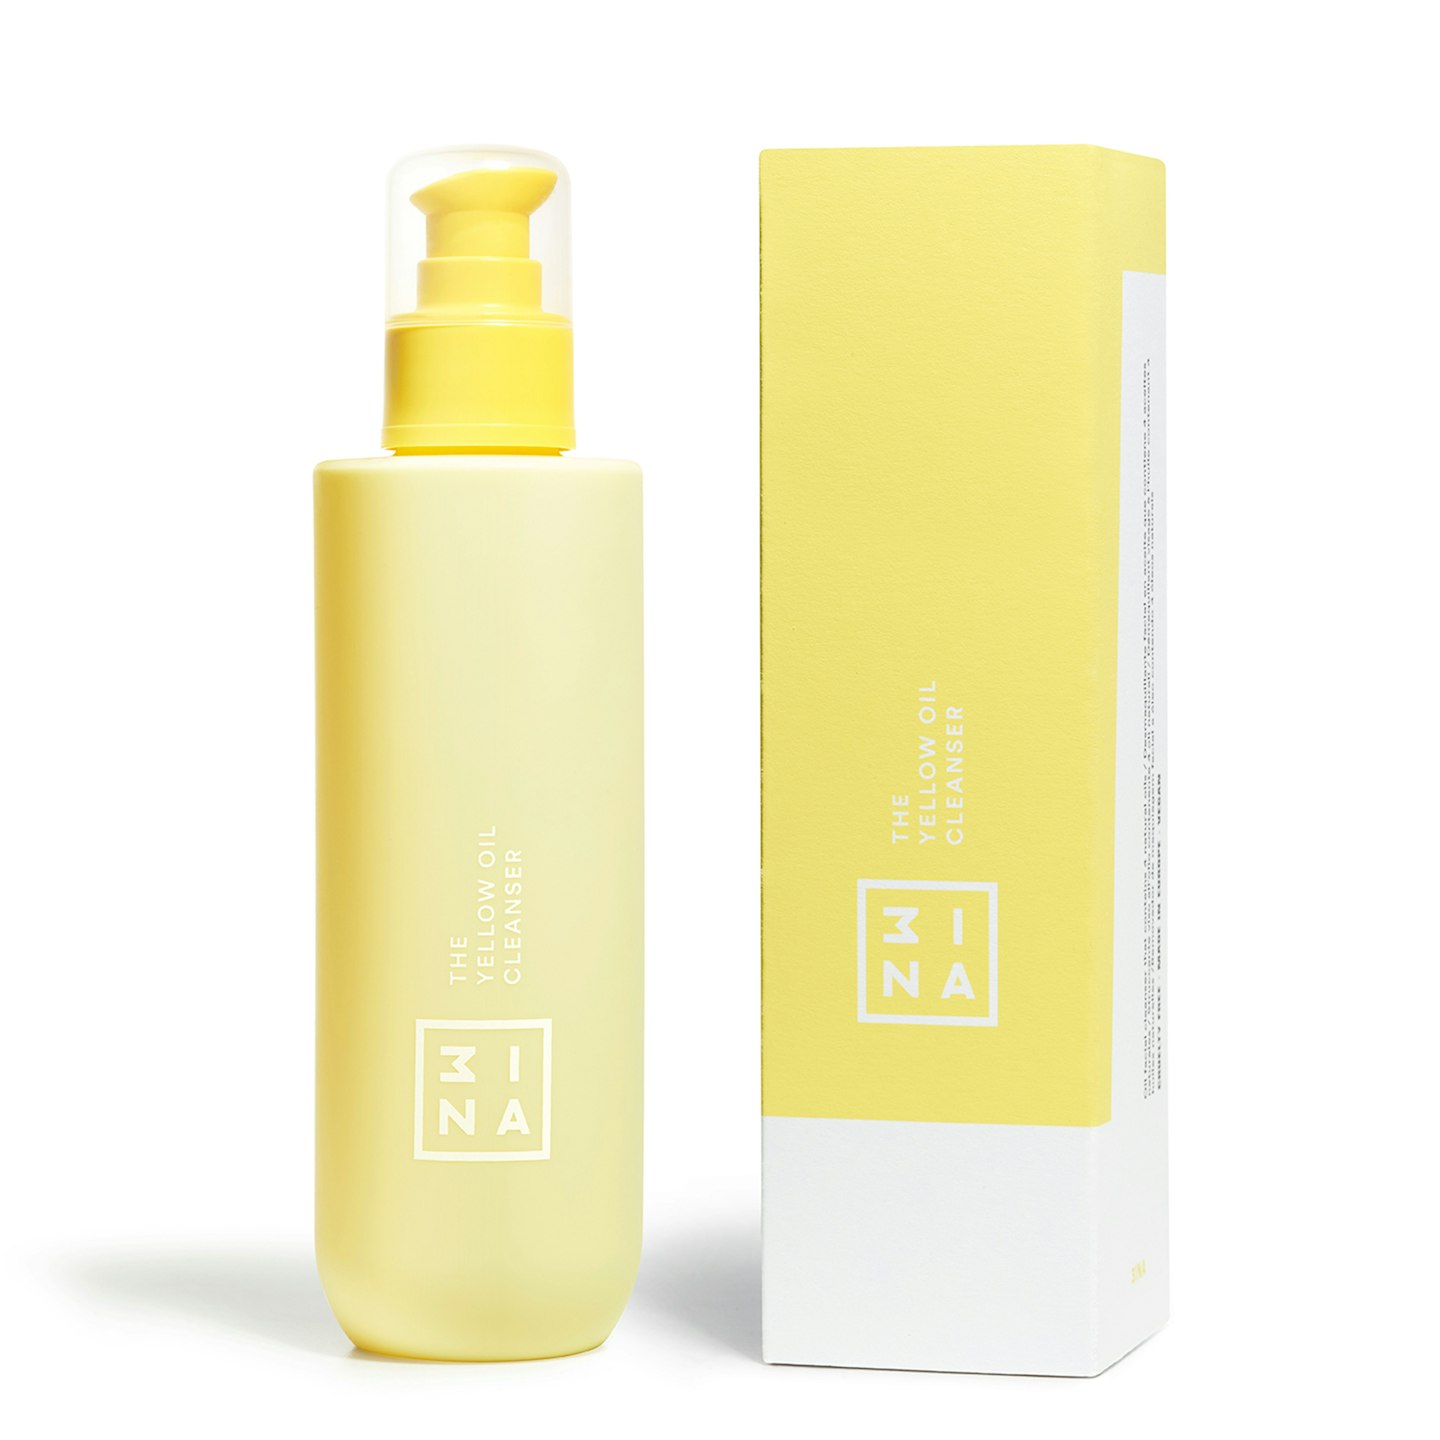 3ina cleansing oil